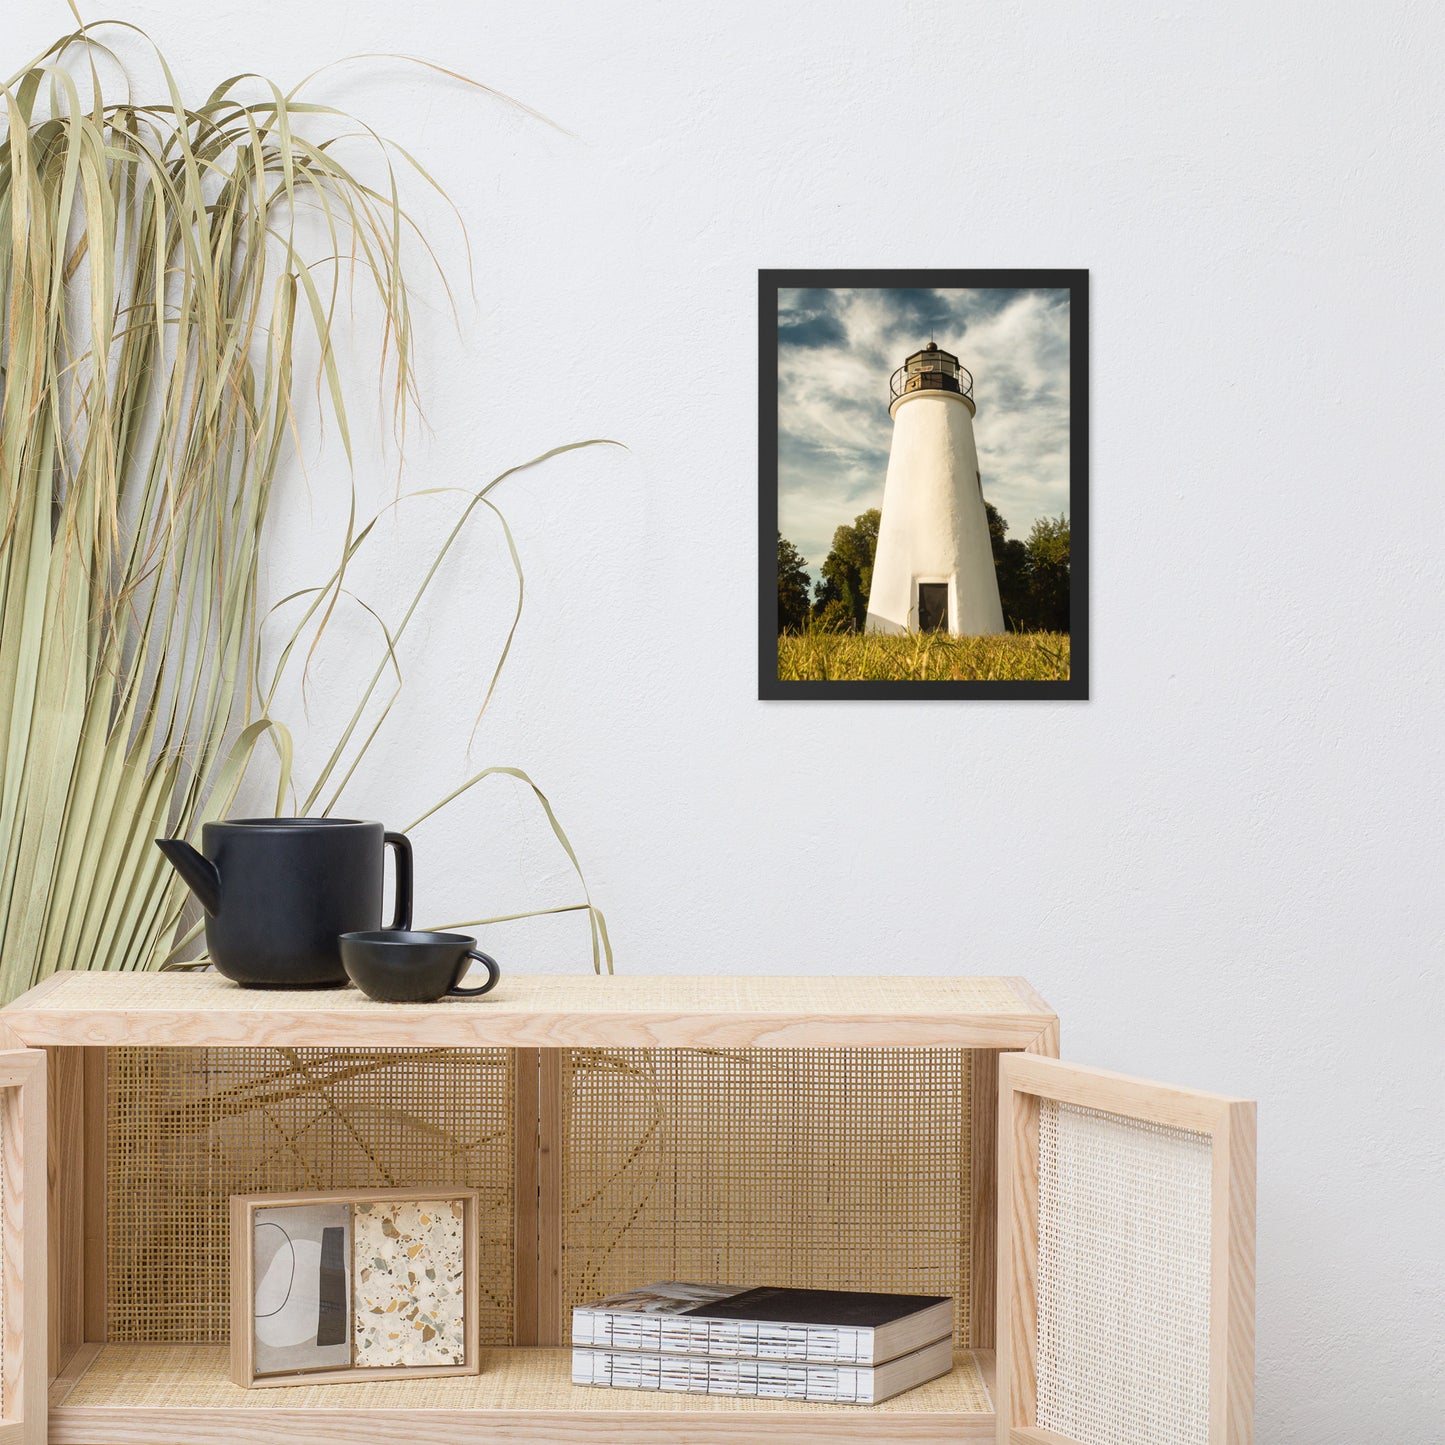 Turkey Point Lighthouse Standing Tall Landscape Framed Photo Paper Wall Art Prints